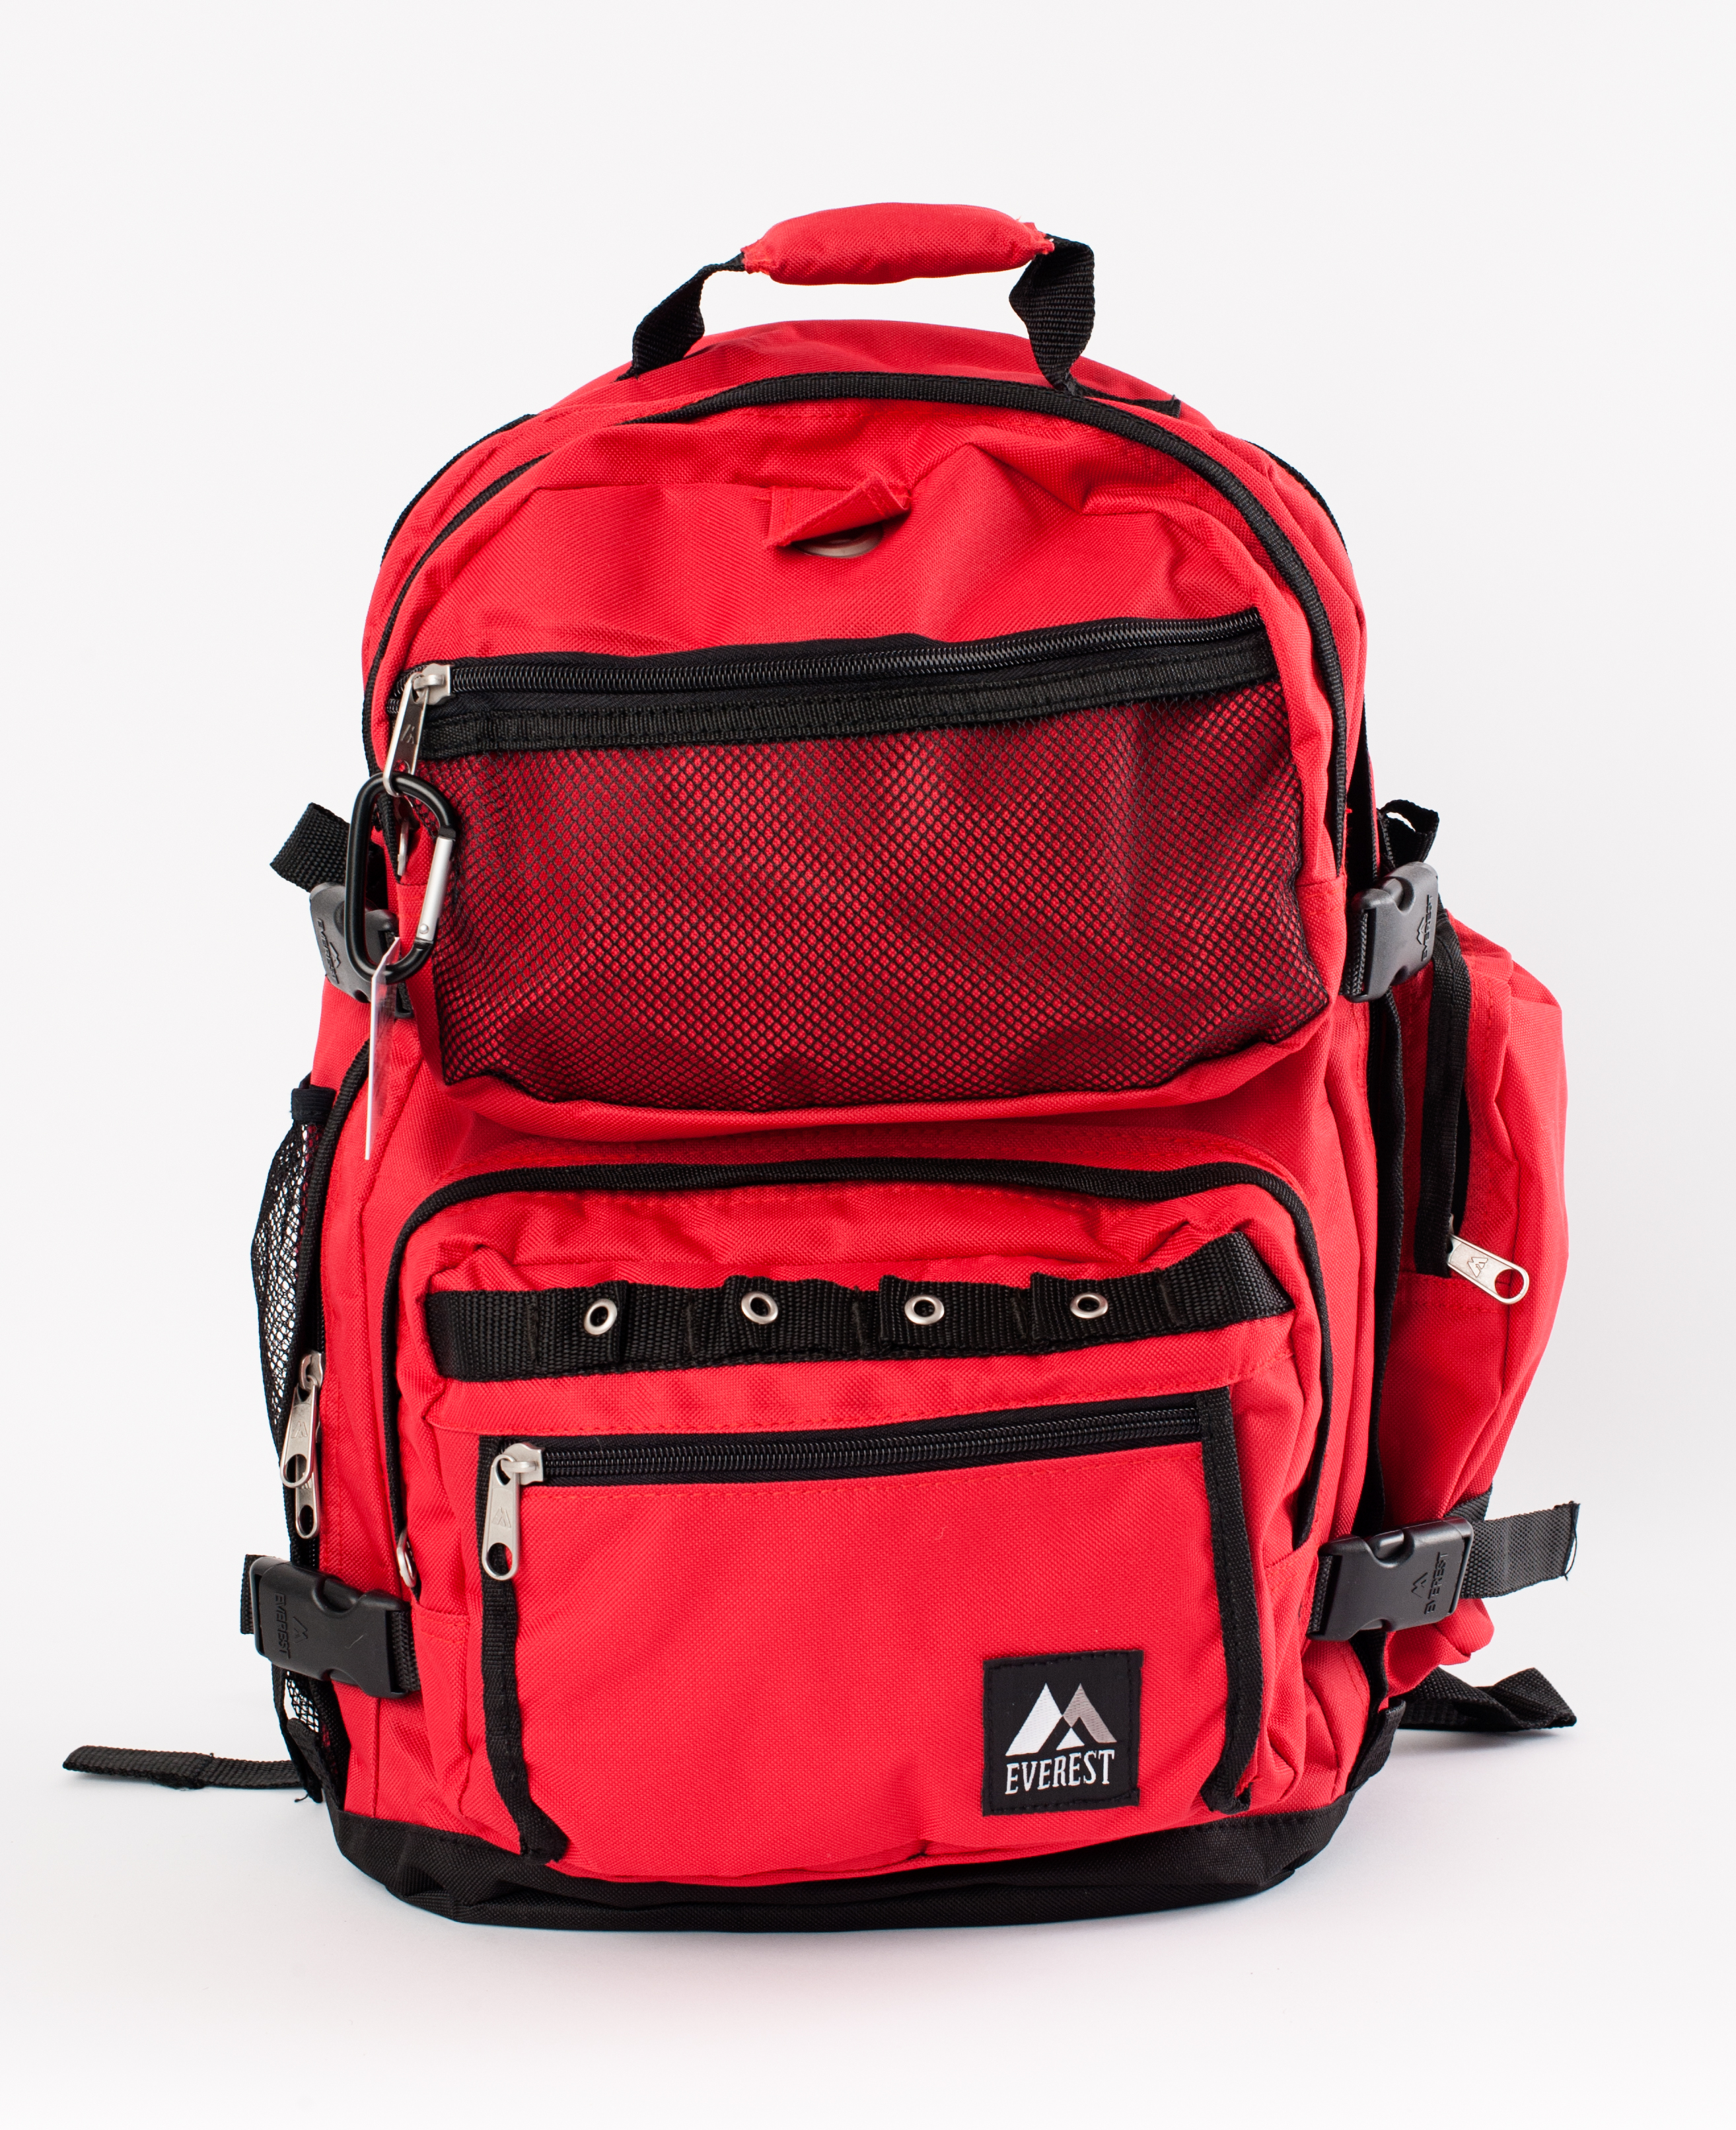 Prepare My Life Oversize Deluxe Backpack (Red)